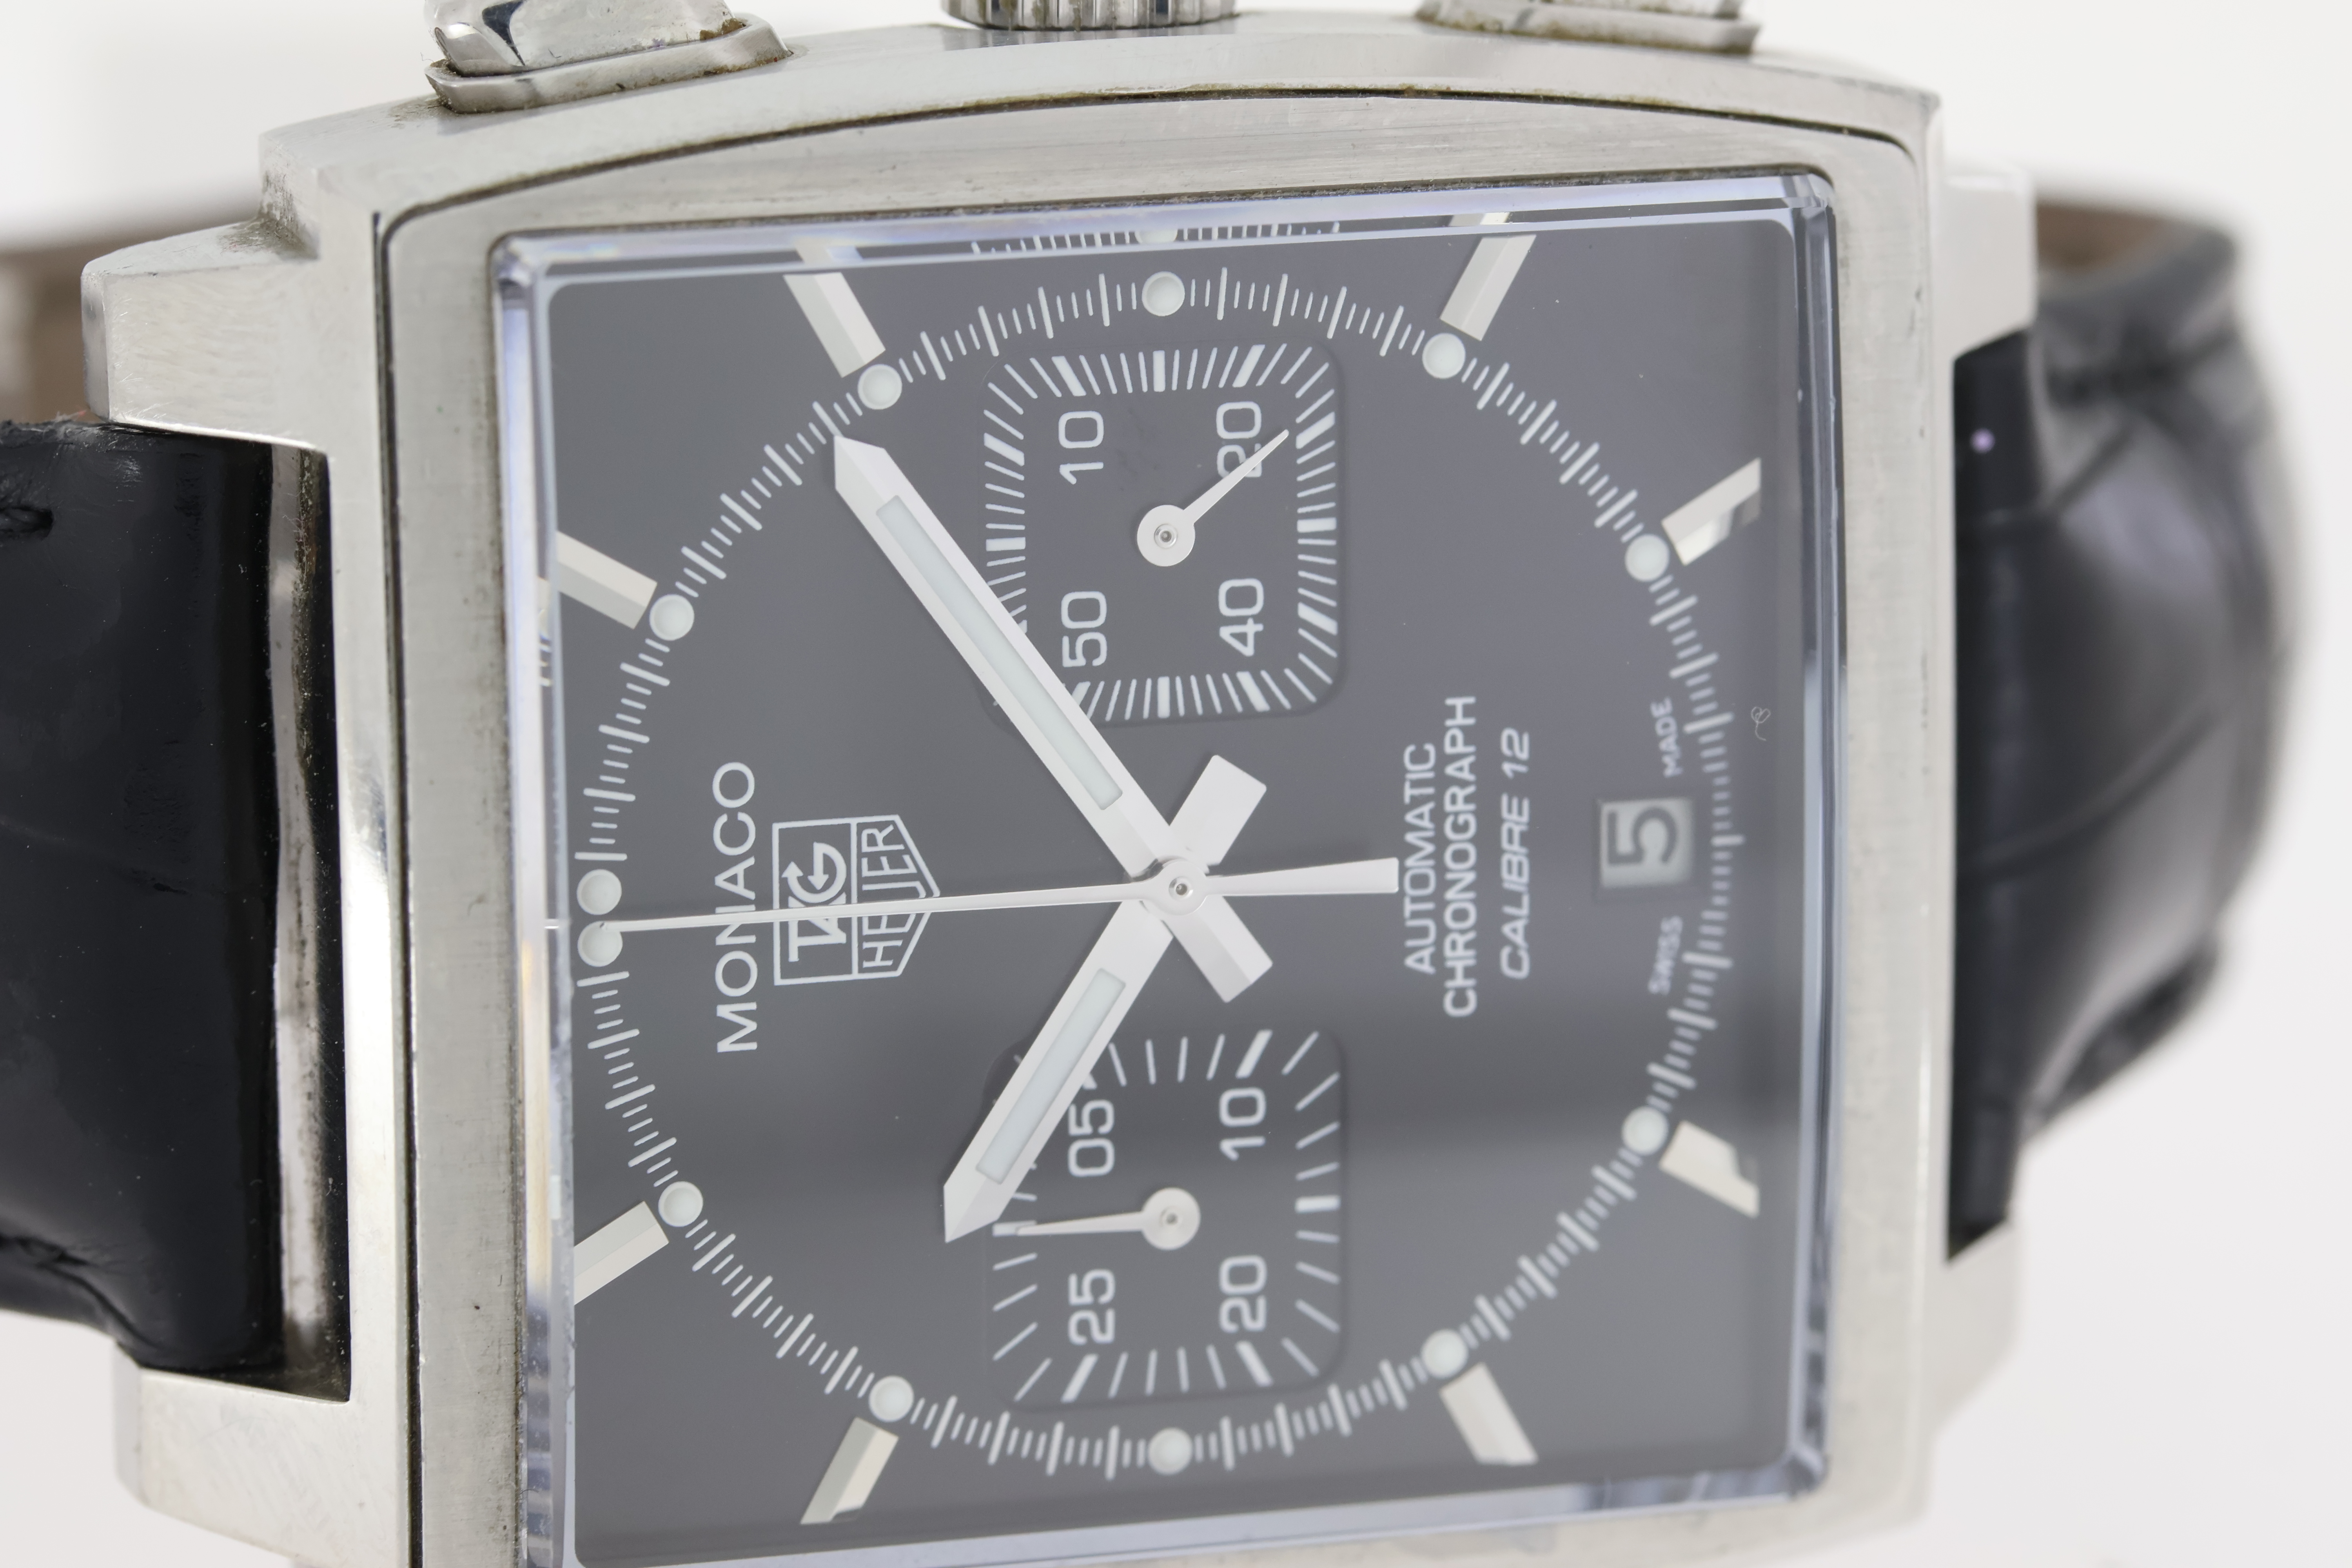 TAG HEUER MONACO CHRONOGRAPH REFERENCE CAW2110 WITH BOX - Image 3 of 4